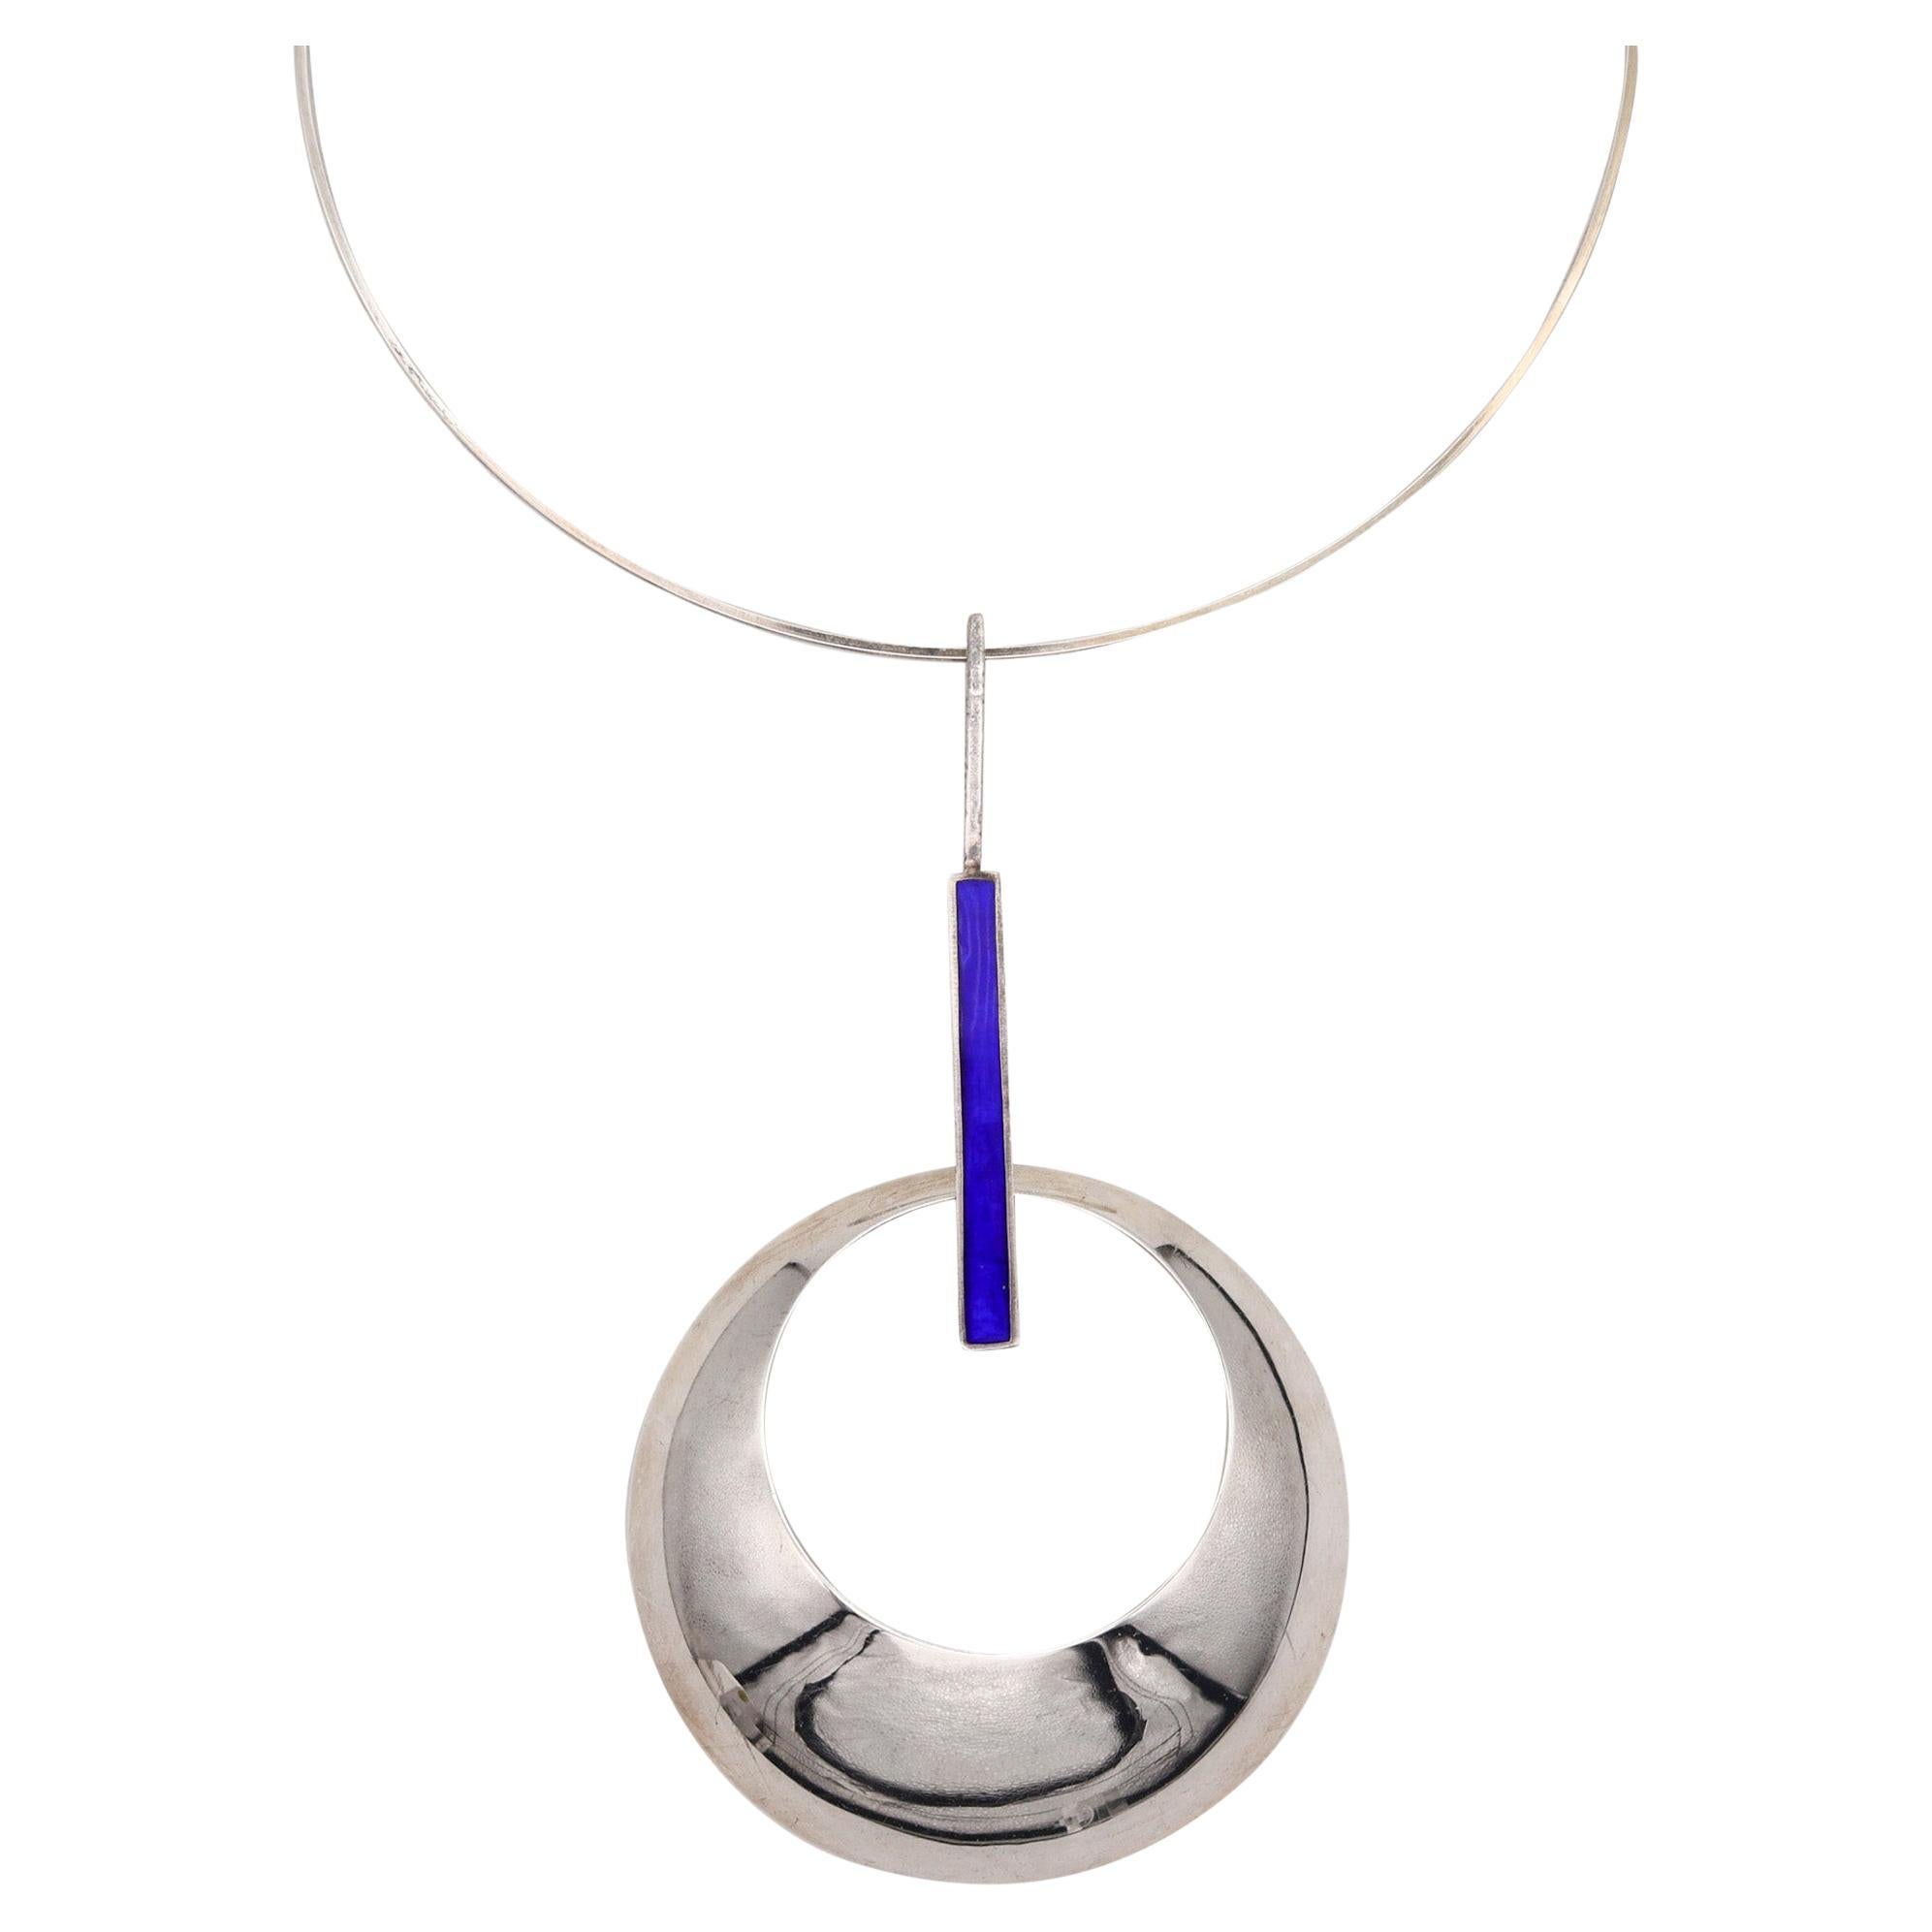 Orlando Orlandini 1970 Italy Enameled Geometric Necklace In .925 Sterling Silver For Sale